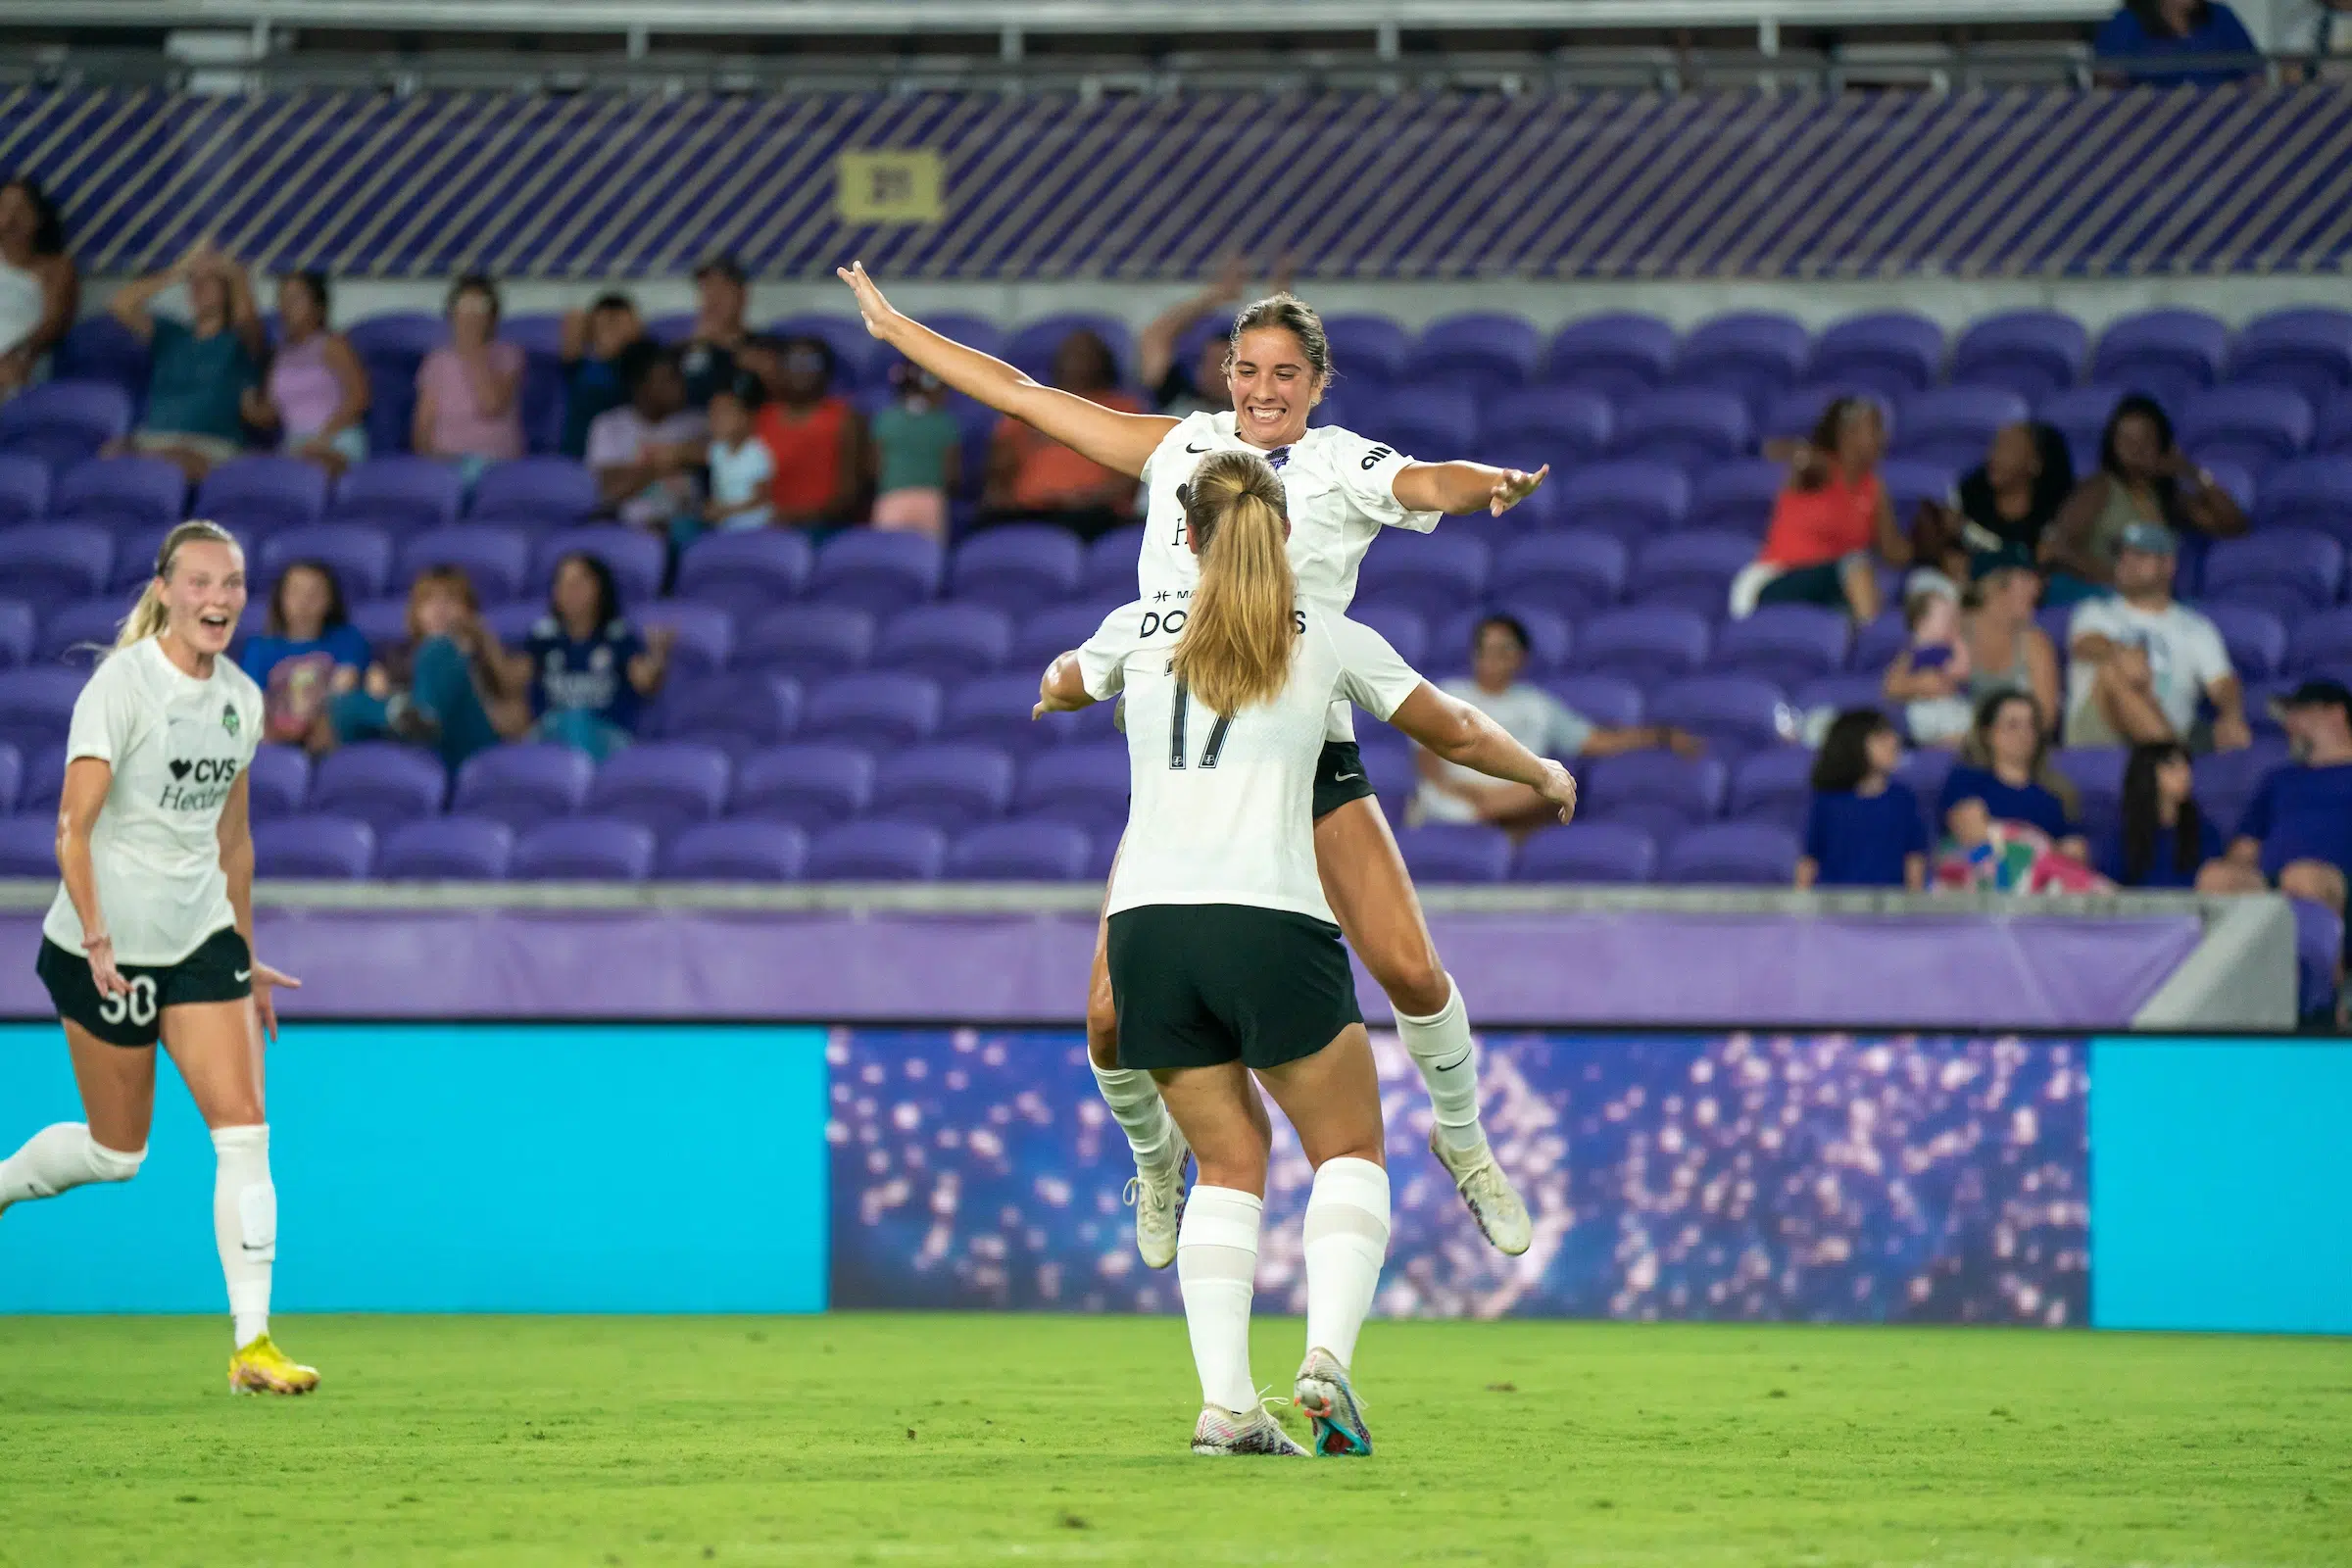 Two soccer players jump up to embrace.